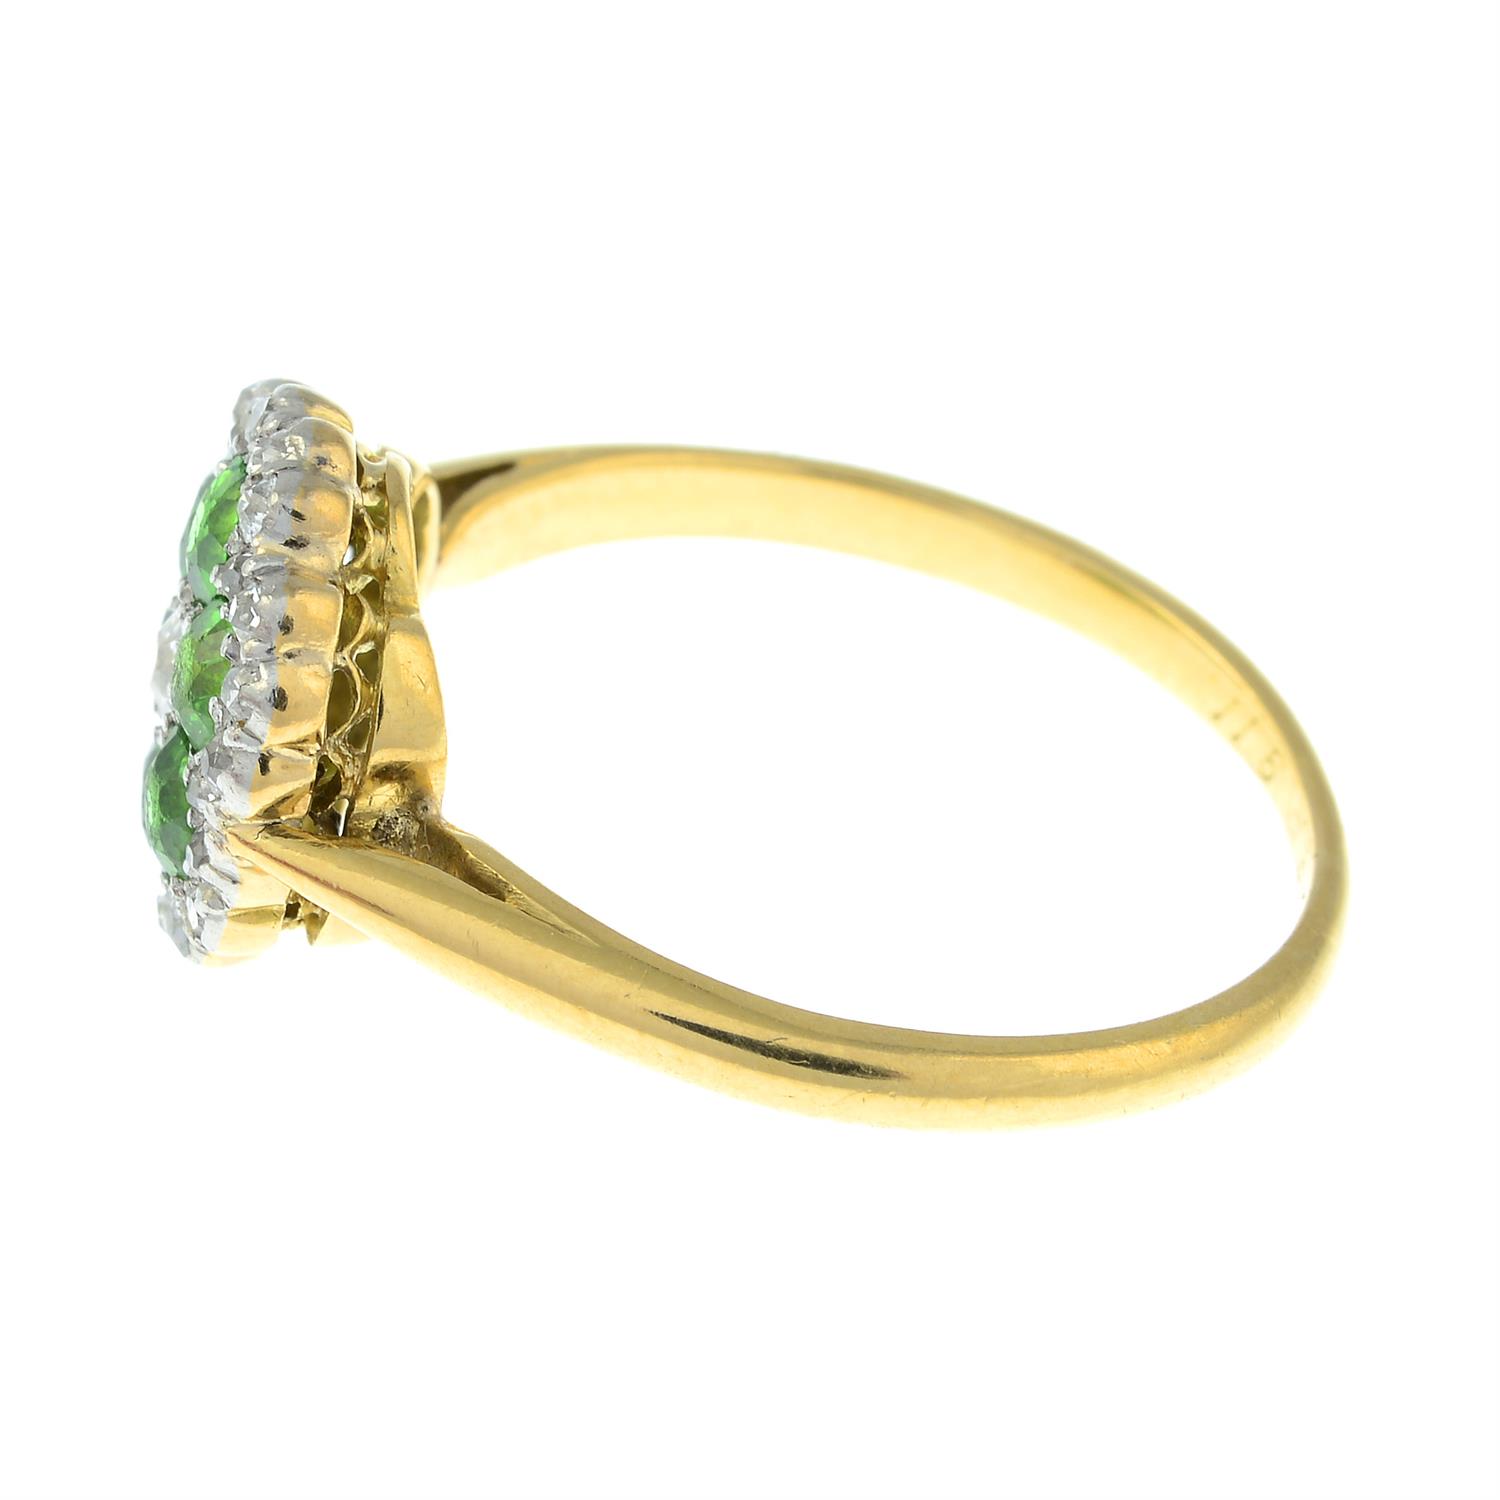 An early 20th century 18ct gold diamond and demantoid garnet cluster ring. - Image 3 of 6